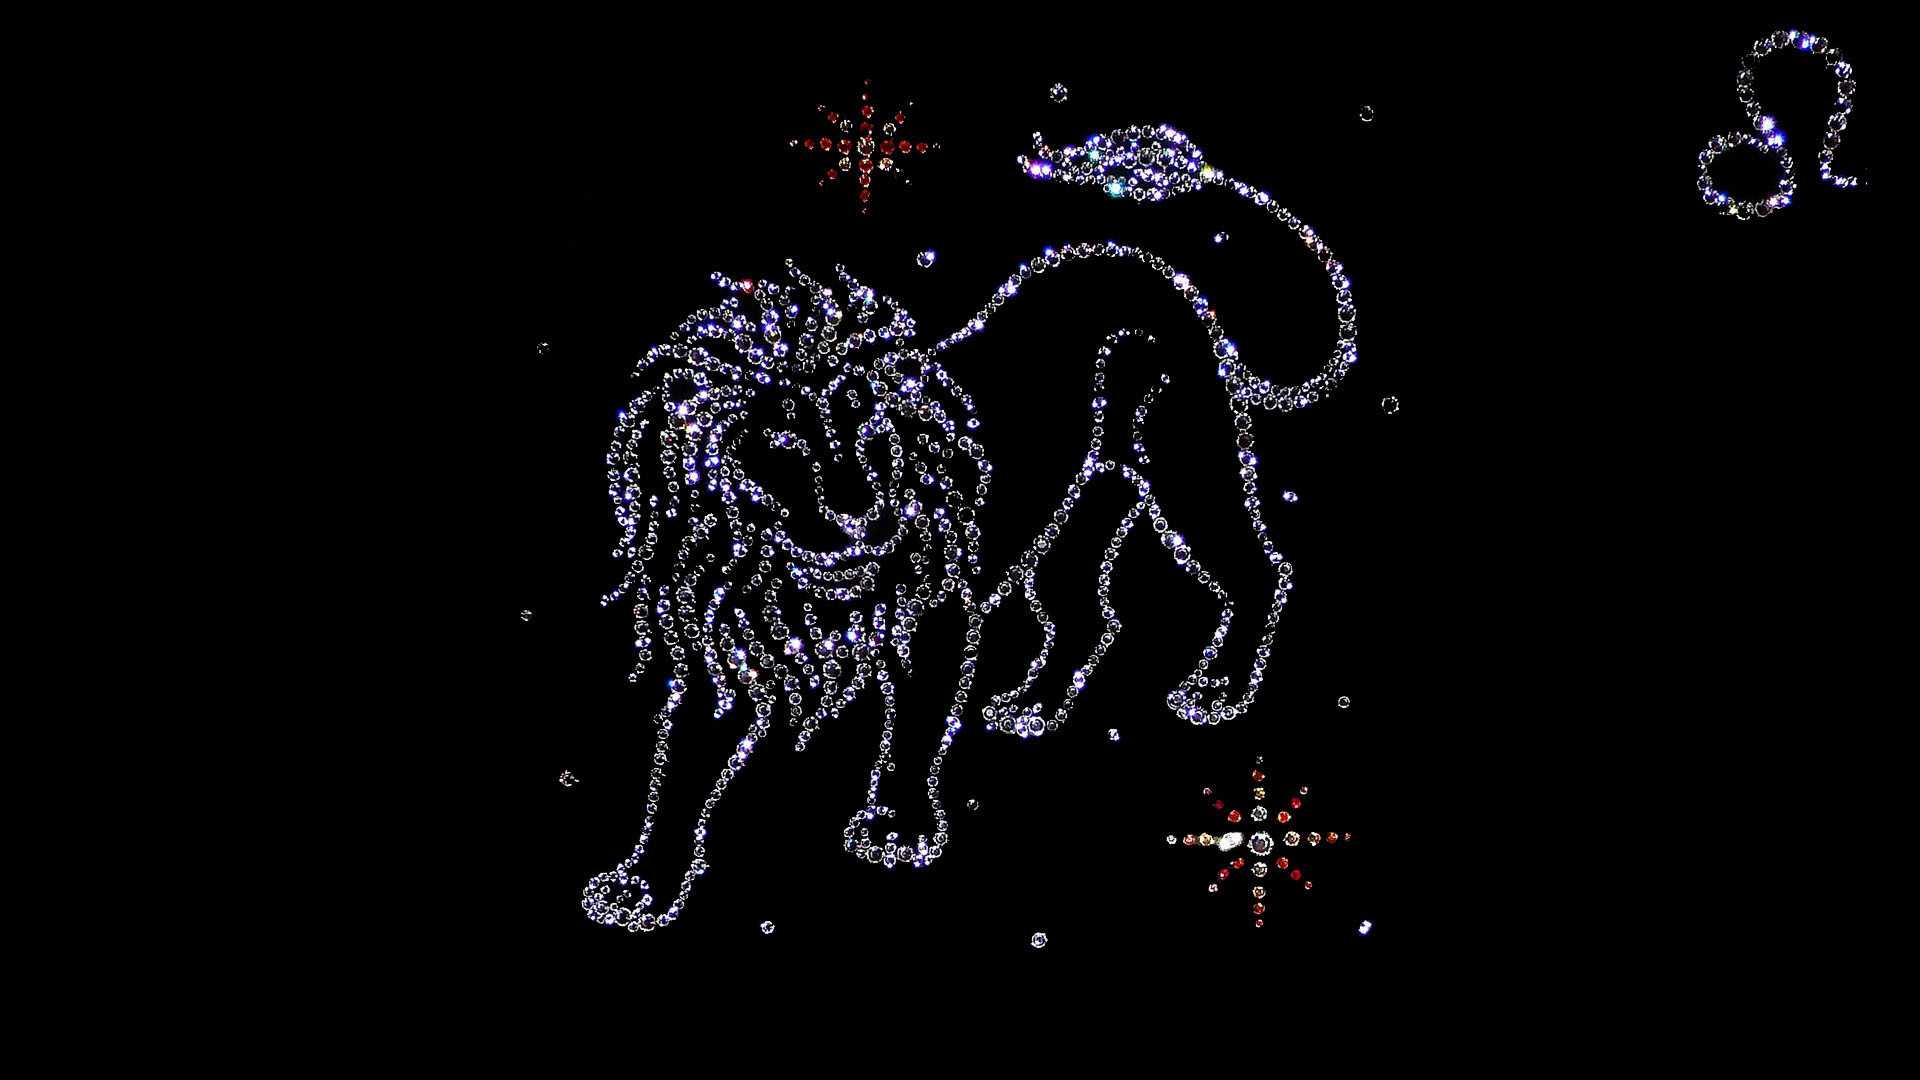 A lion with stars and other shapes around it - Leo